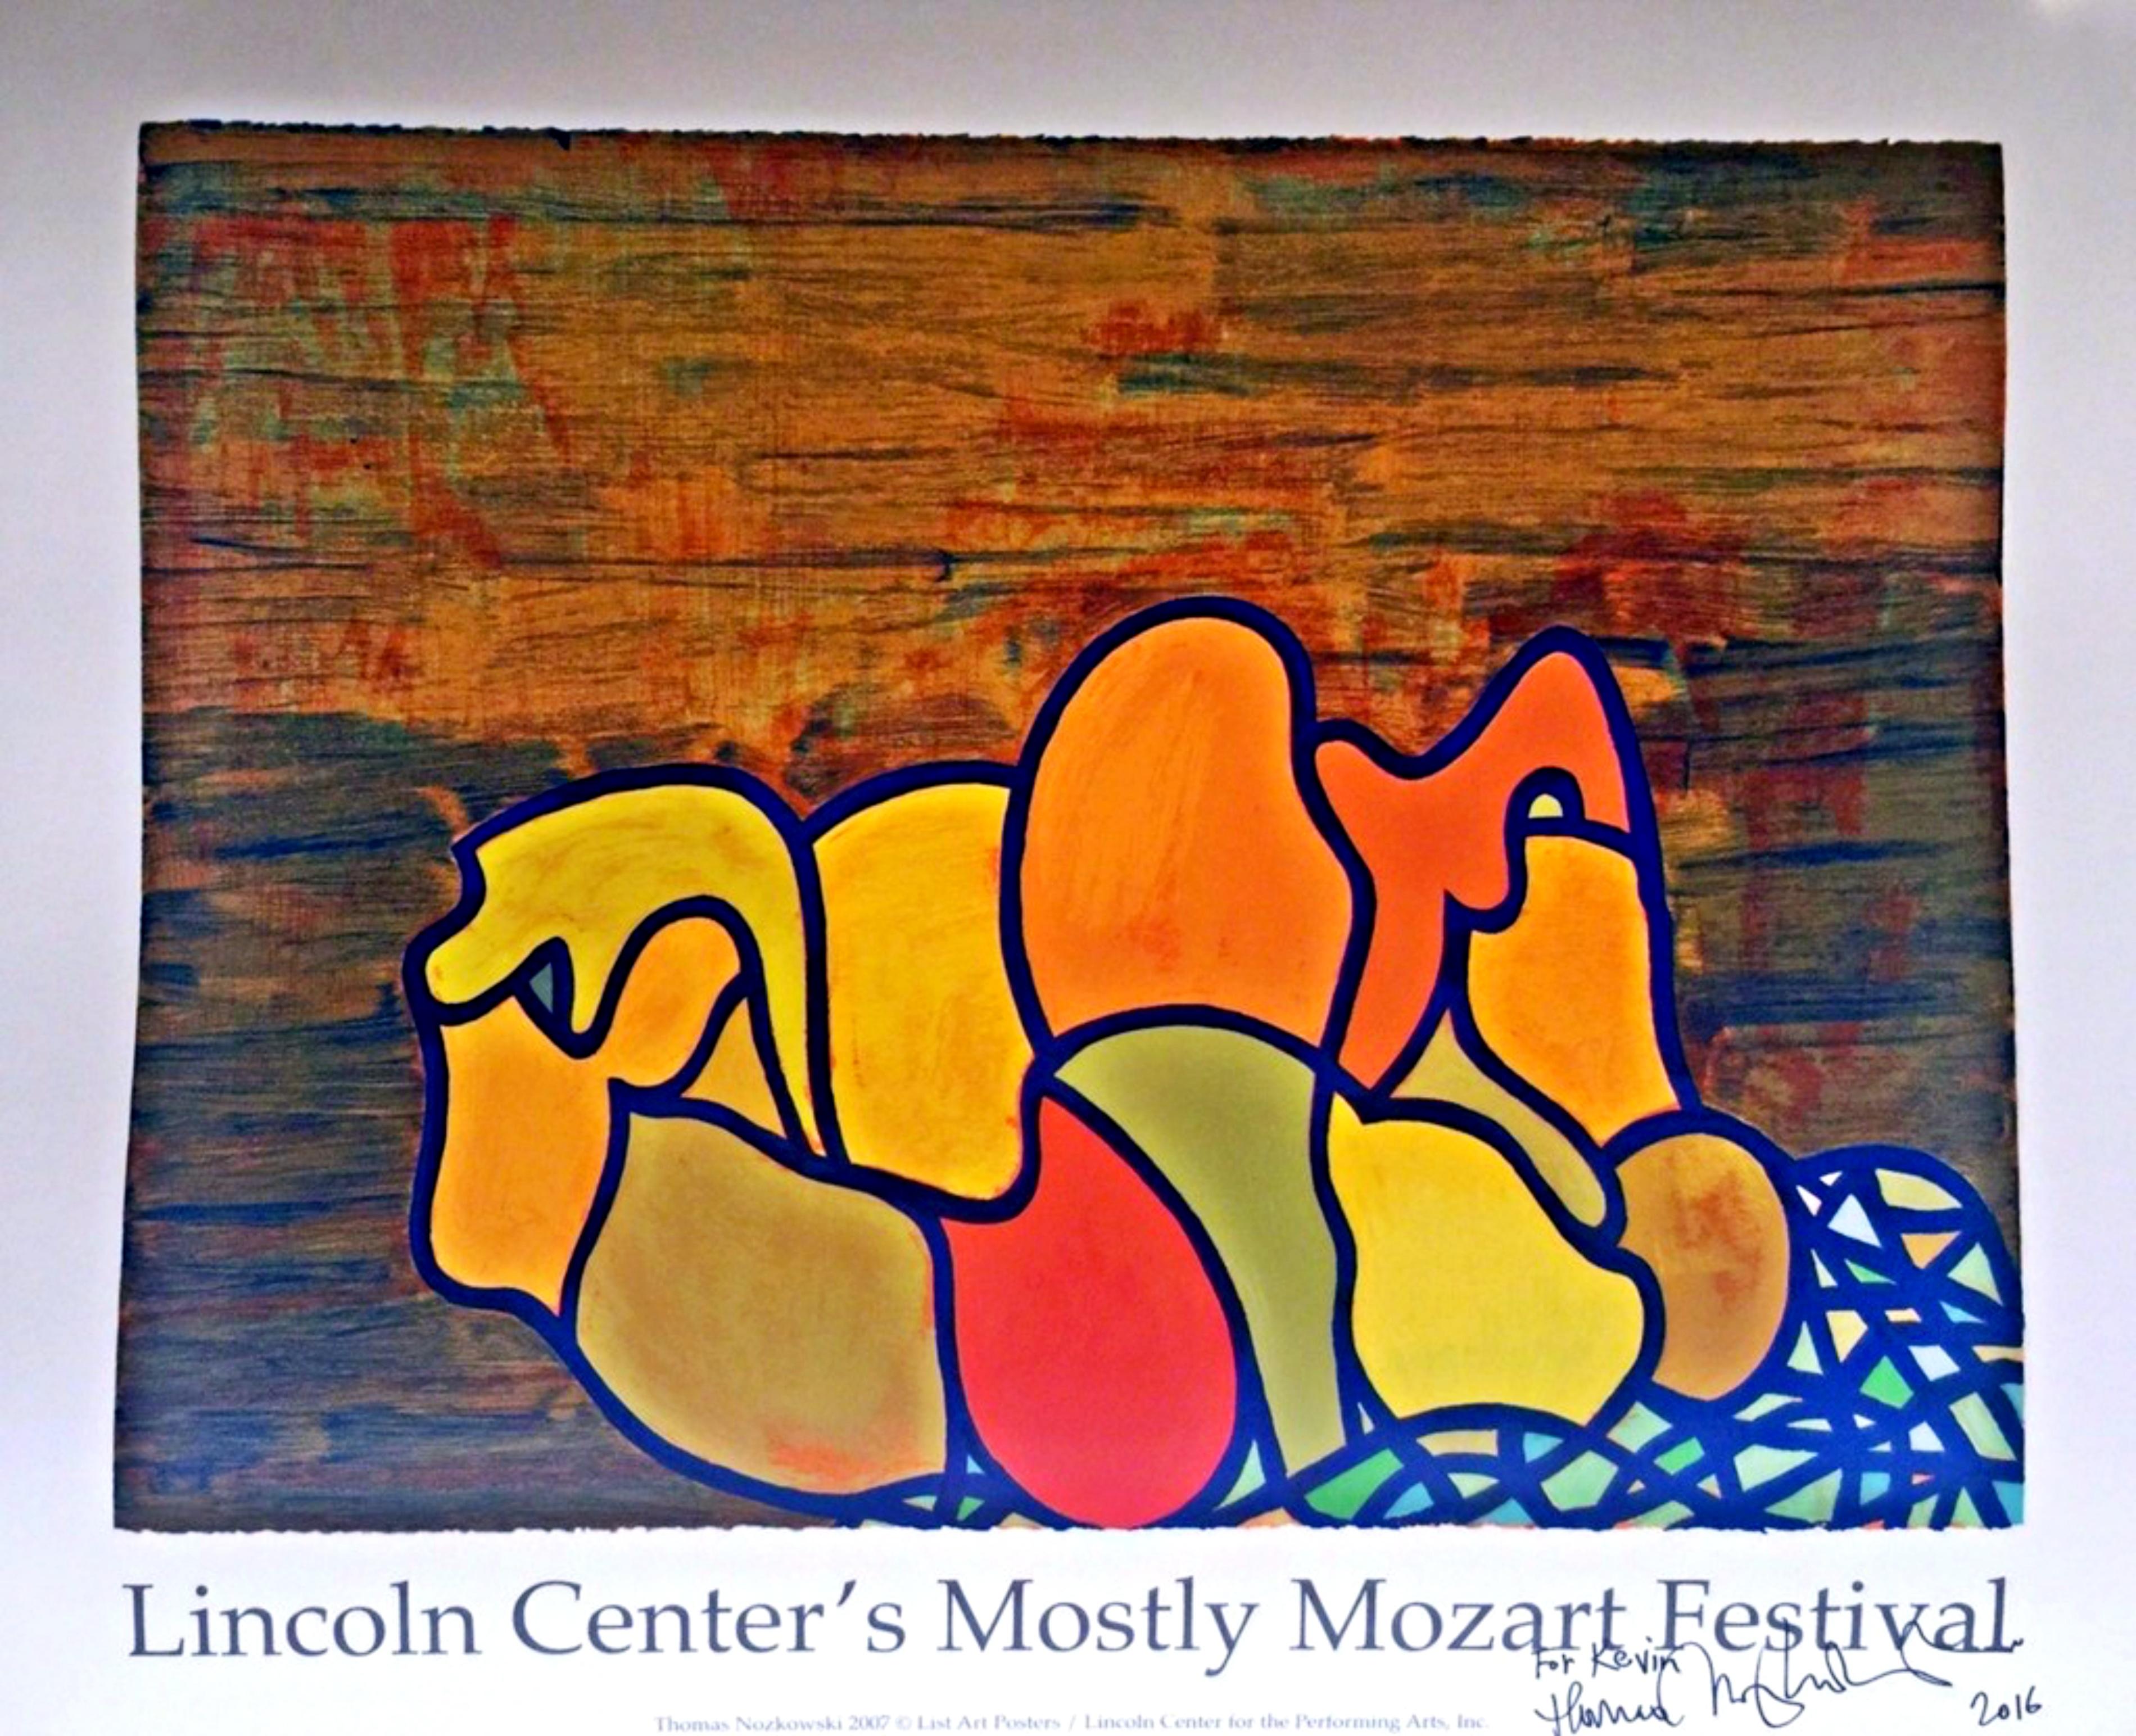 The Lincoln Center Print